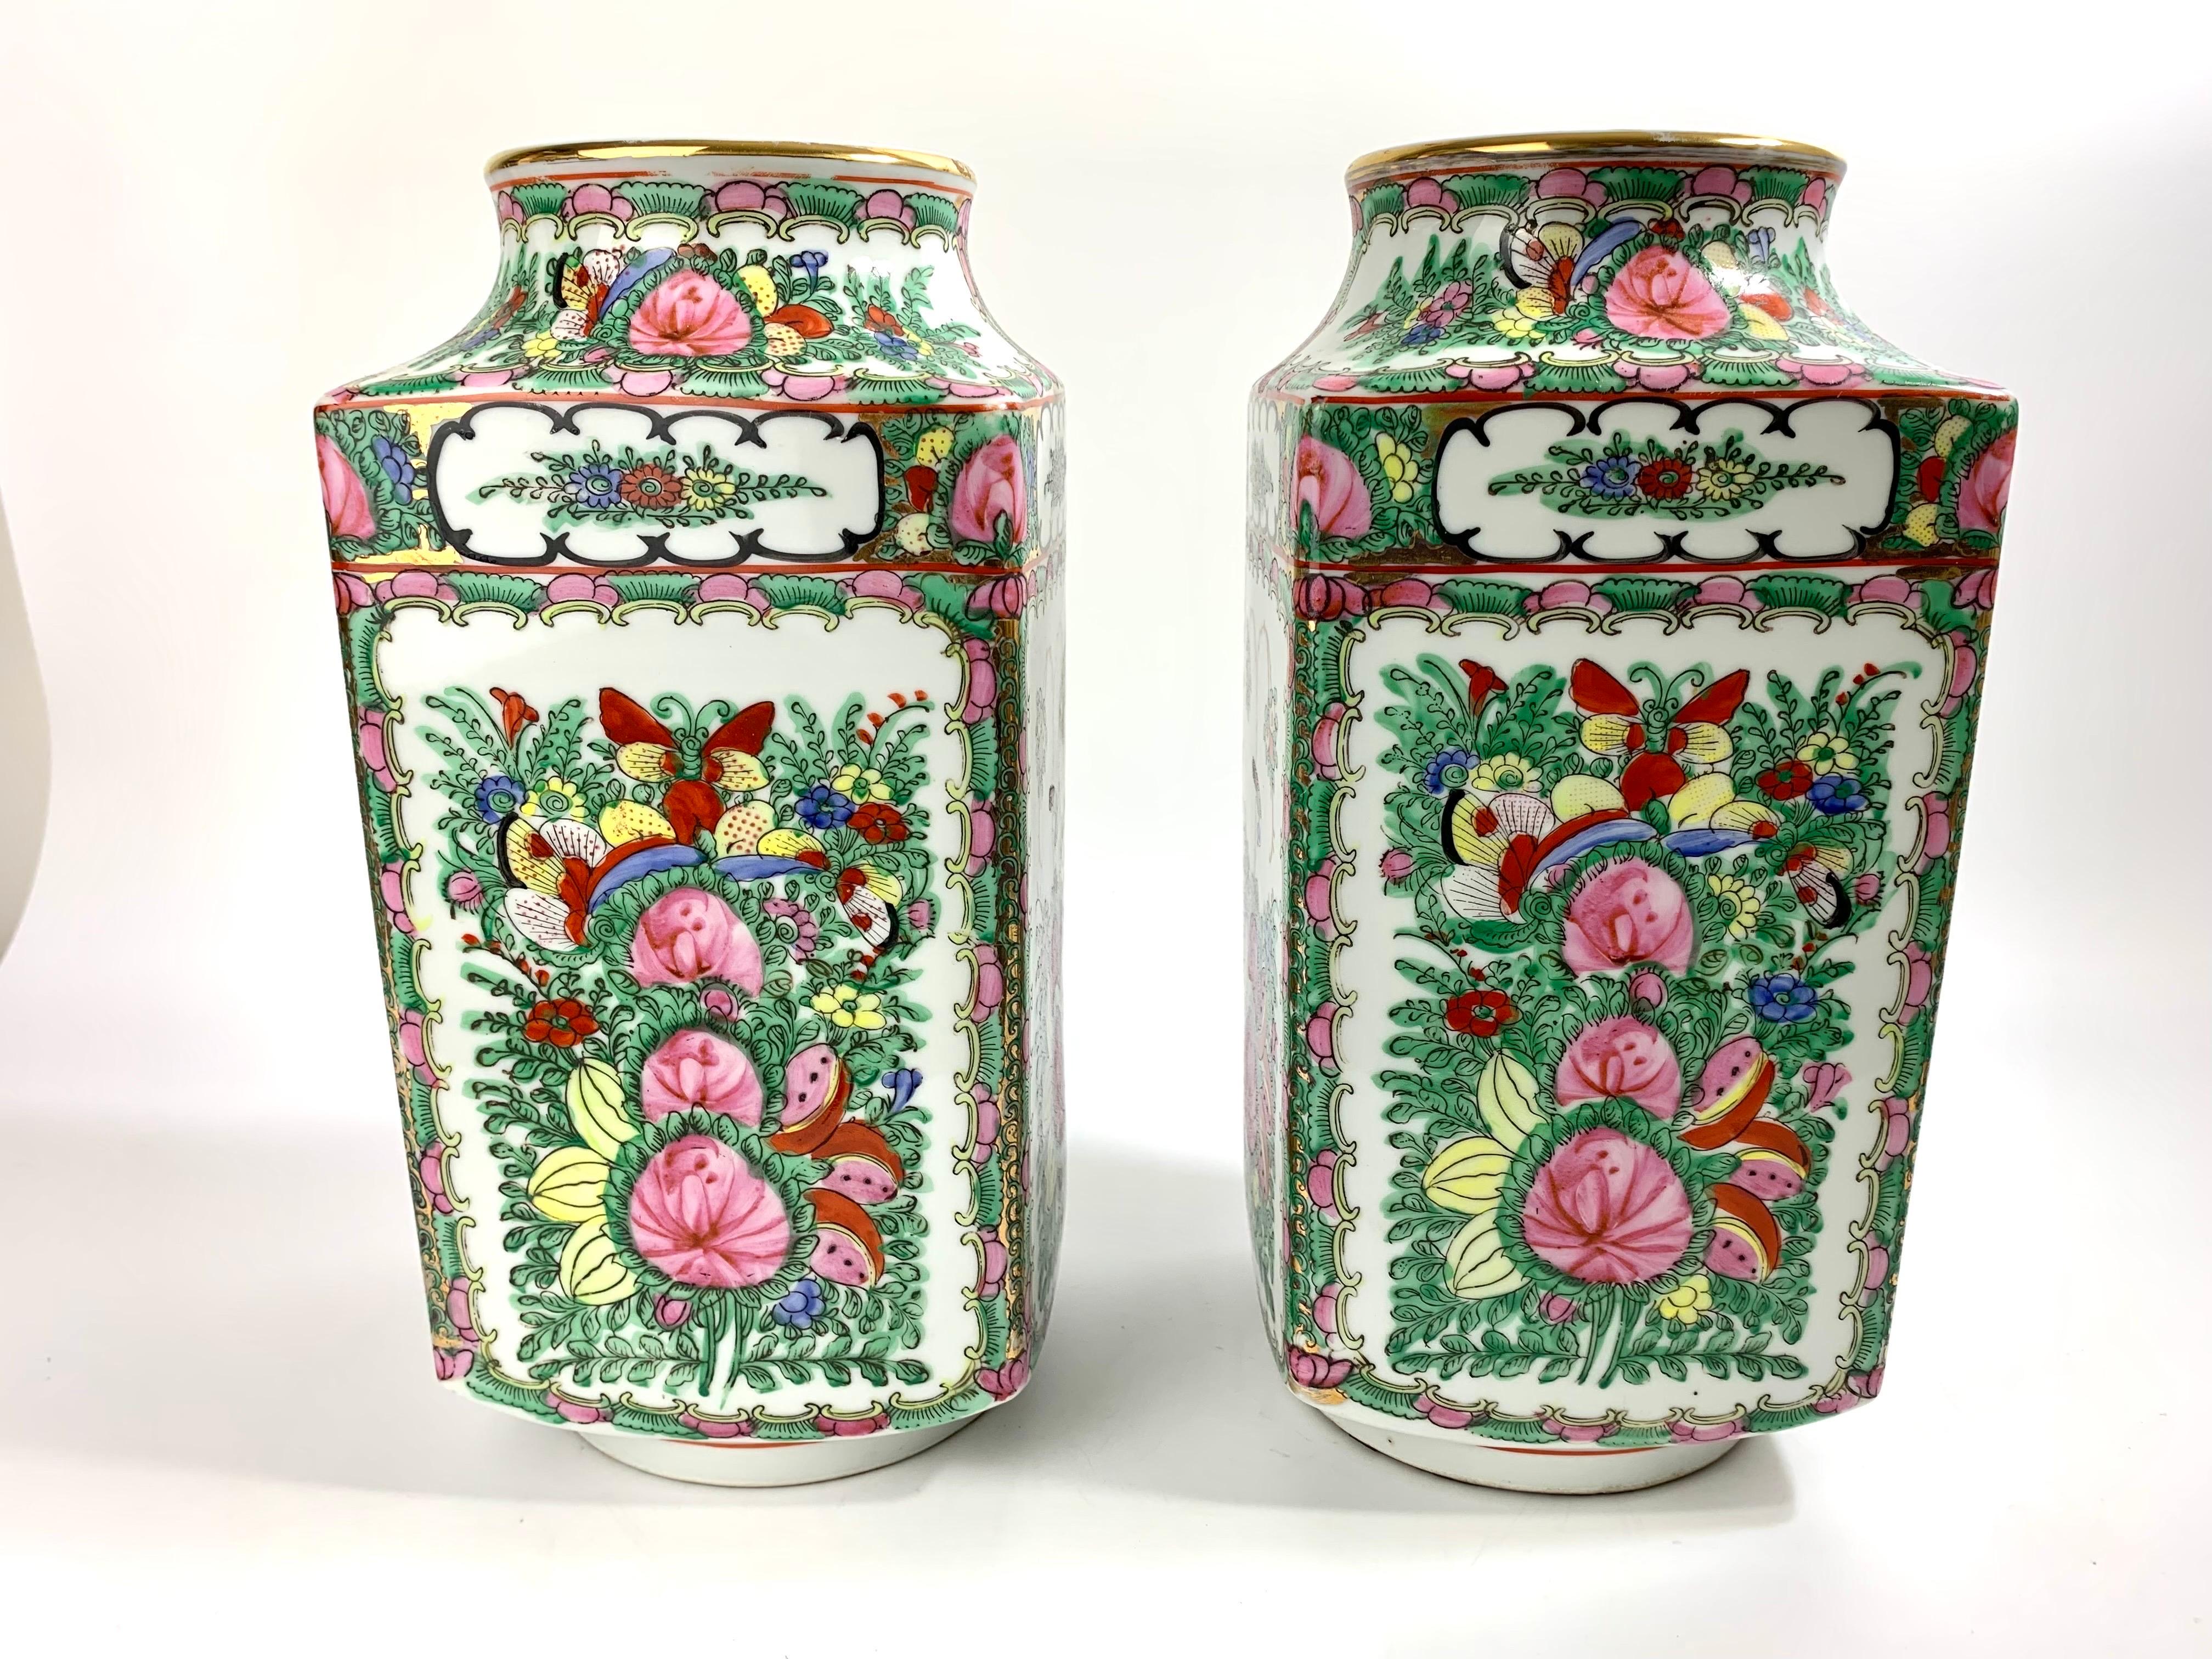 Beautiful pair of large hand painted Rose Canton vases.  Floral and insect designs.  Previously used as lamp bases they both have holes drilled into the bottom.  They can also function as vases if you drop a glass vase inside.  Marked as porcelain